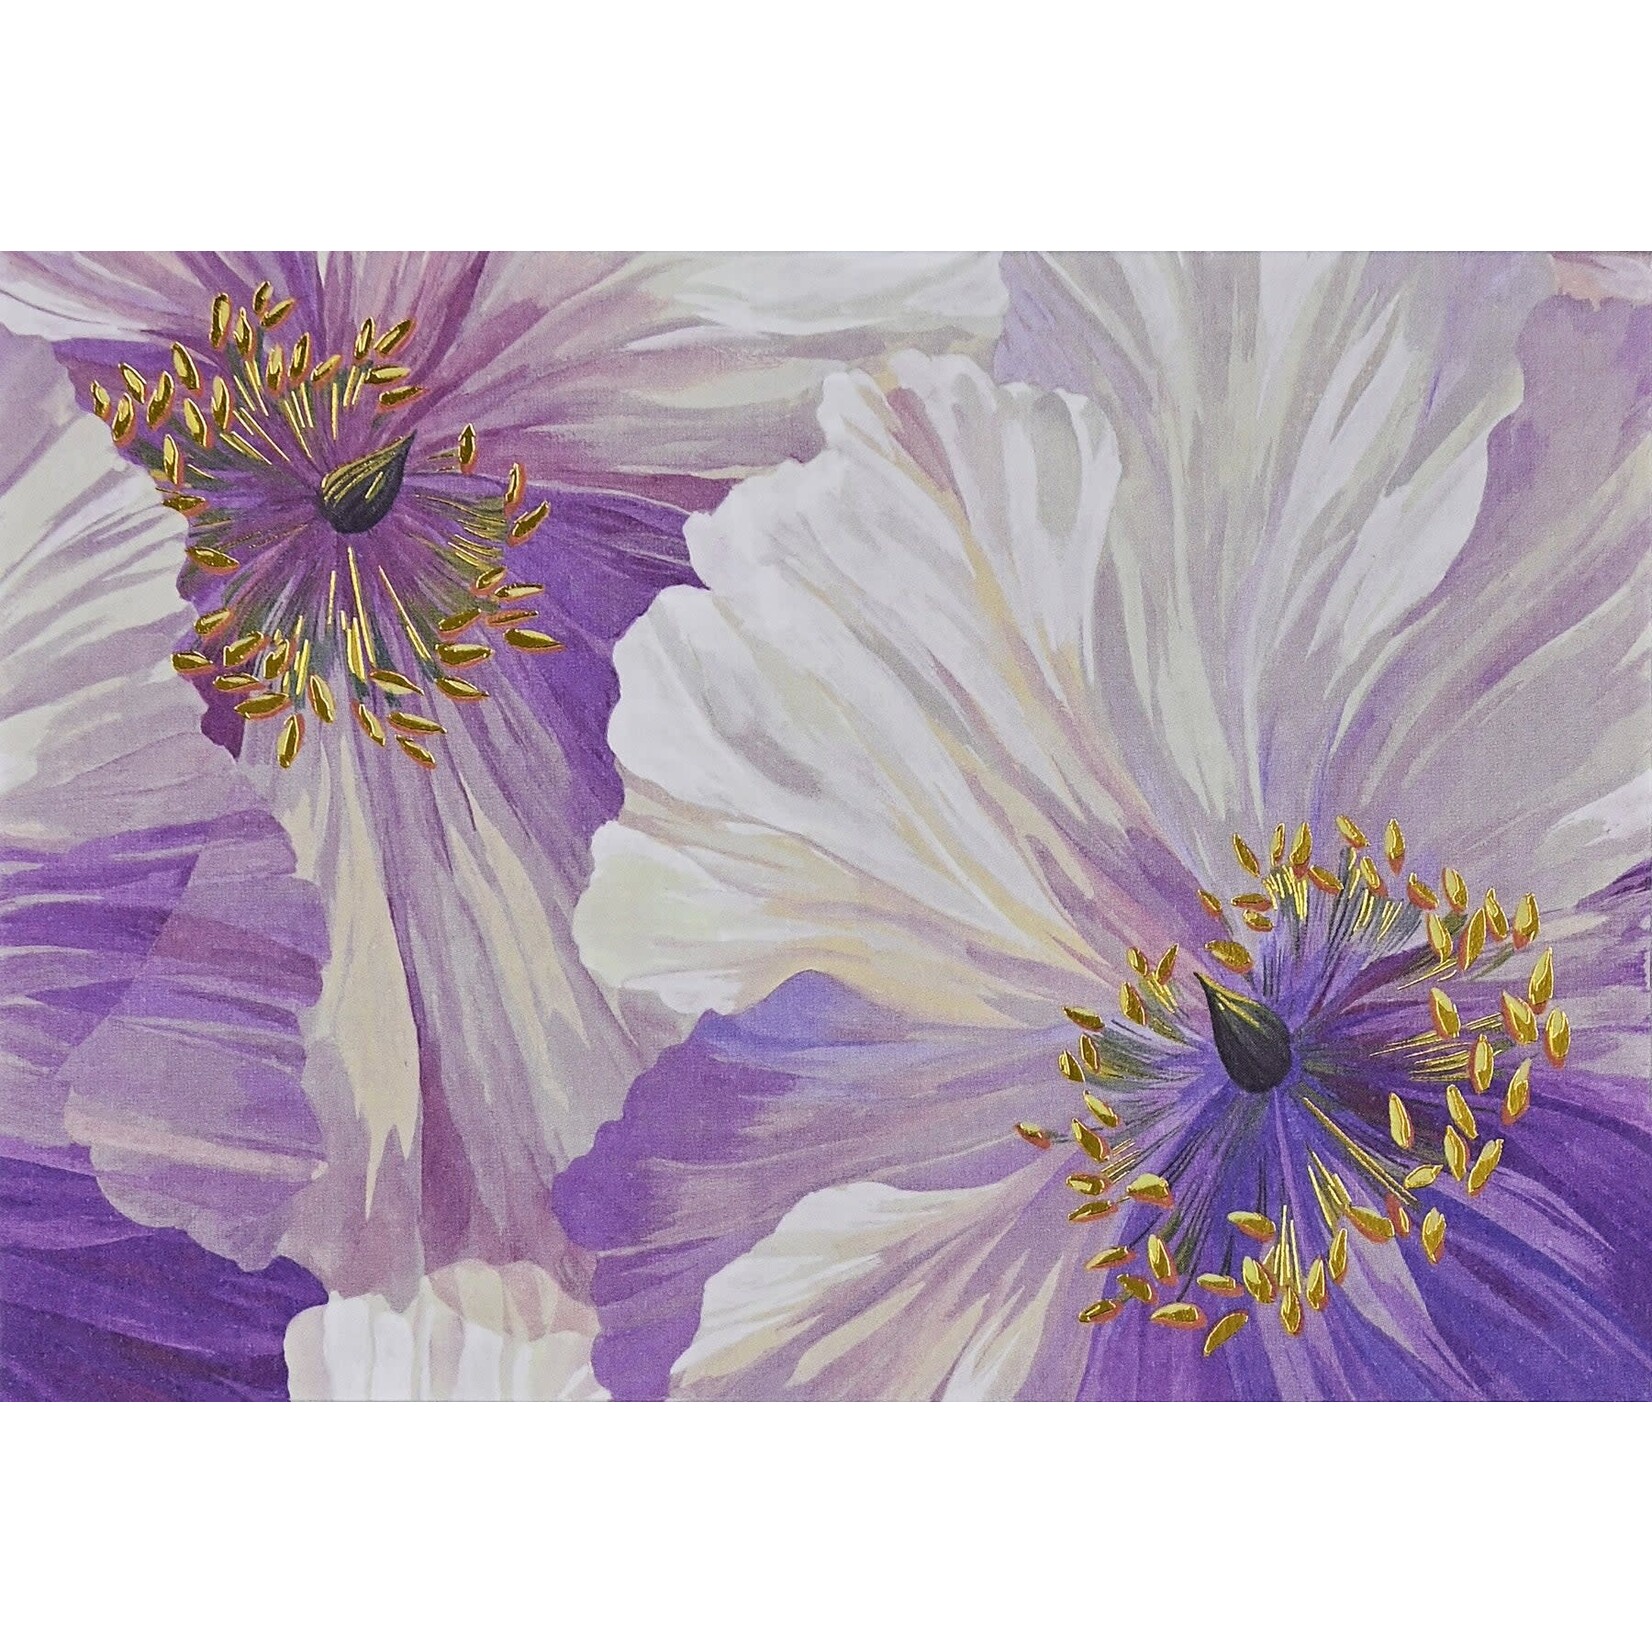 Peter Pauper Press Poppies in Bloom Boxed Note Cards